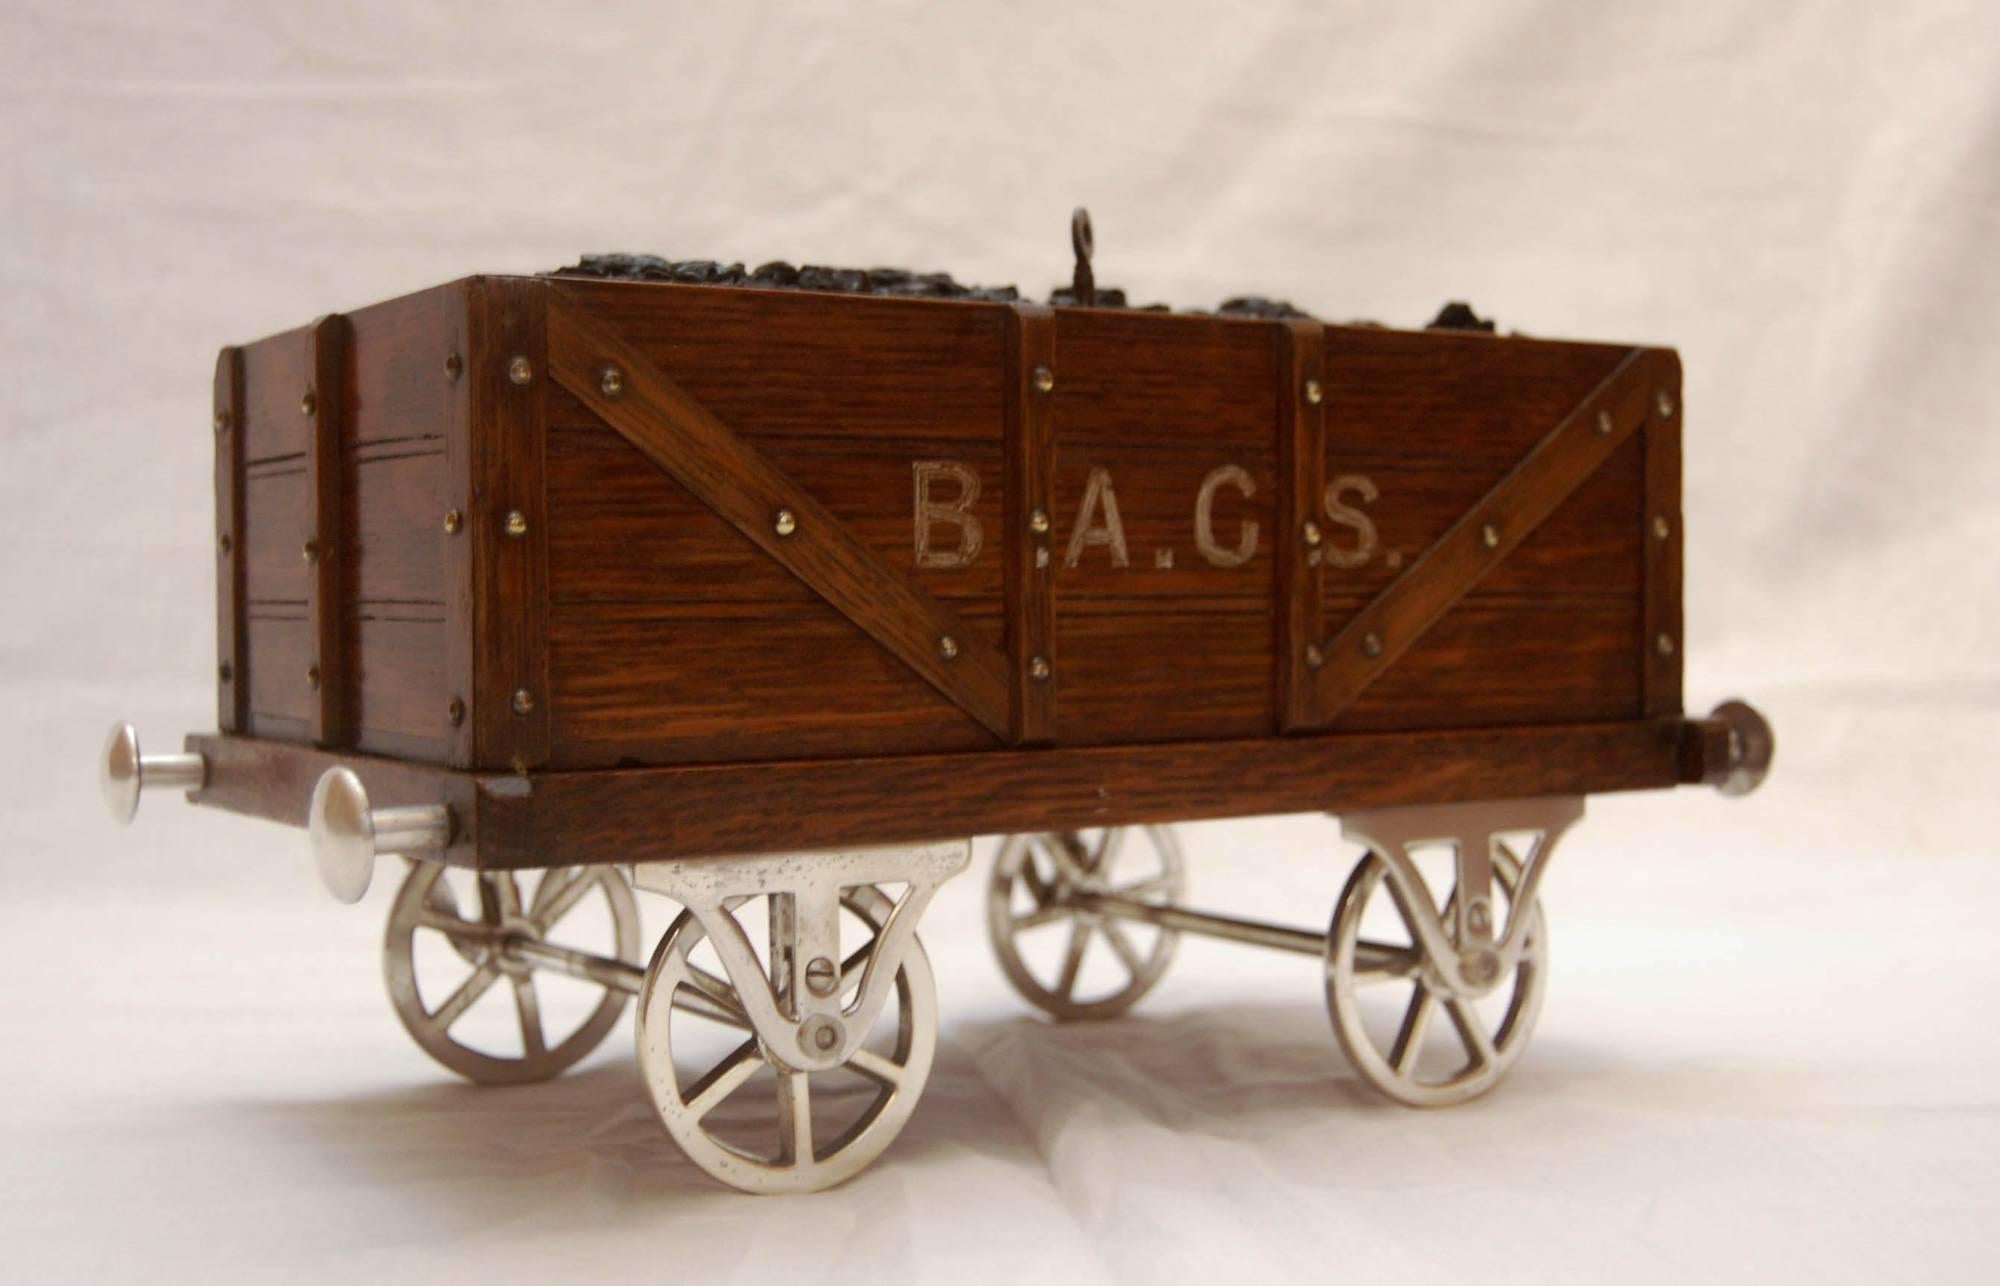 A late Victorian railway coal wagon tobacco box.

This large tobacco box was originally retailed and advertised as “The Railway Coal Waggon Cigar & Cigarette Cabinet. The Latest Novelty, Made in London” and has a registered design number 230537